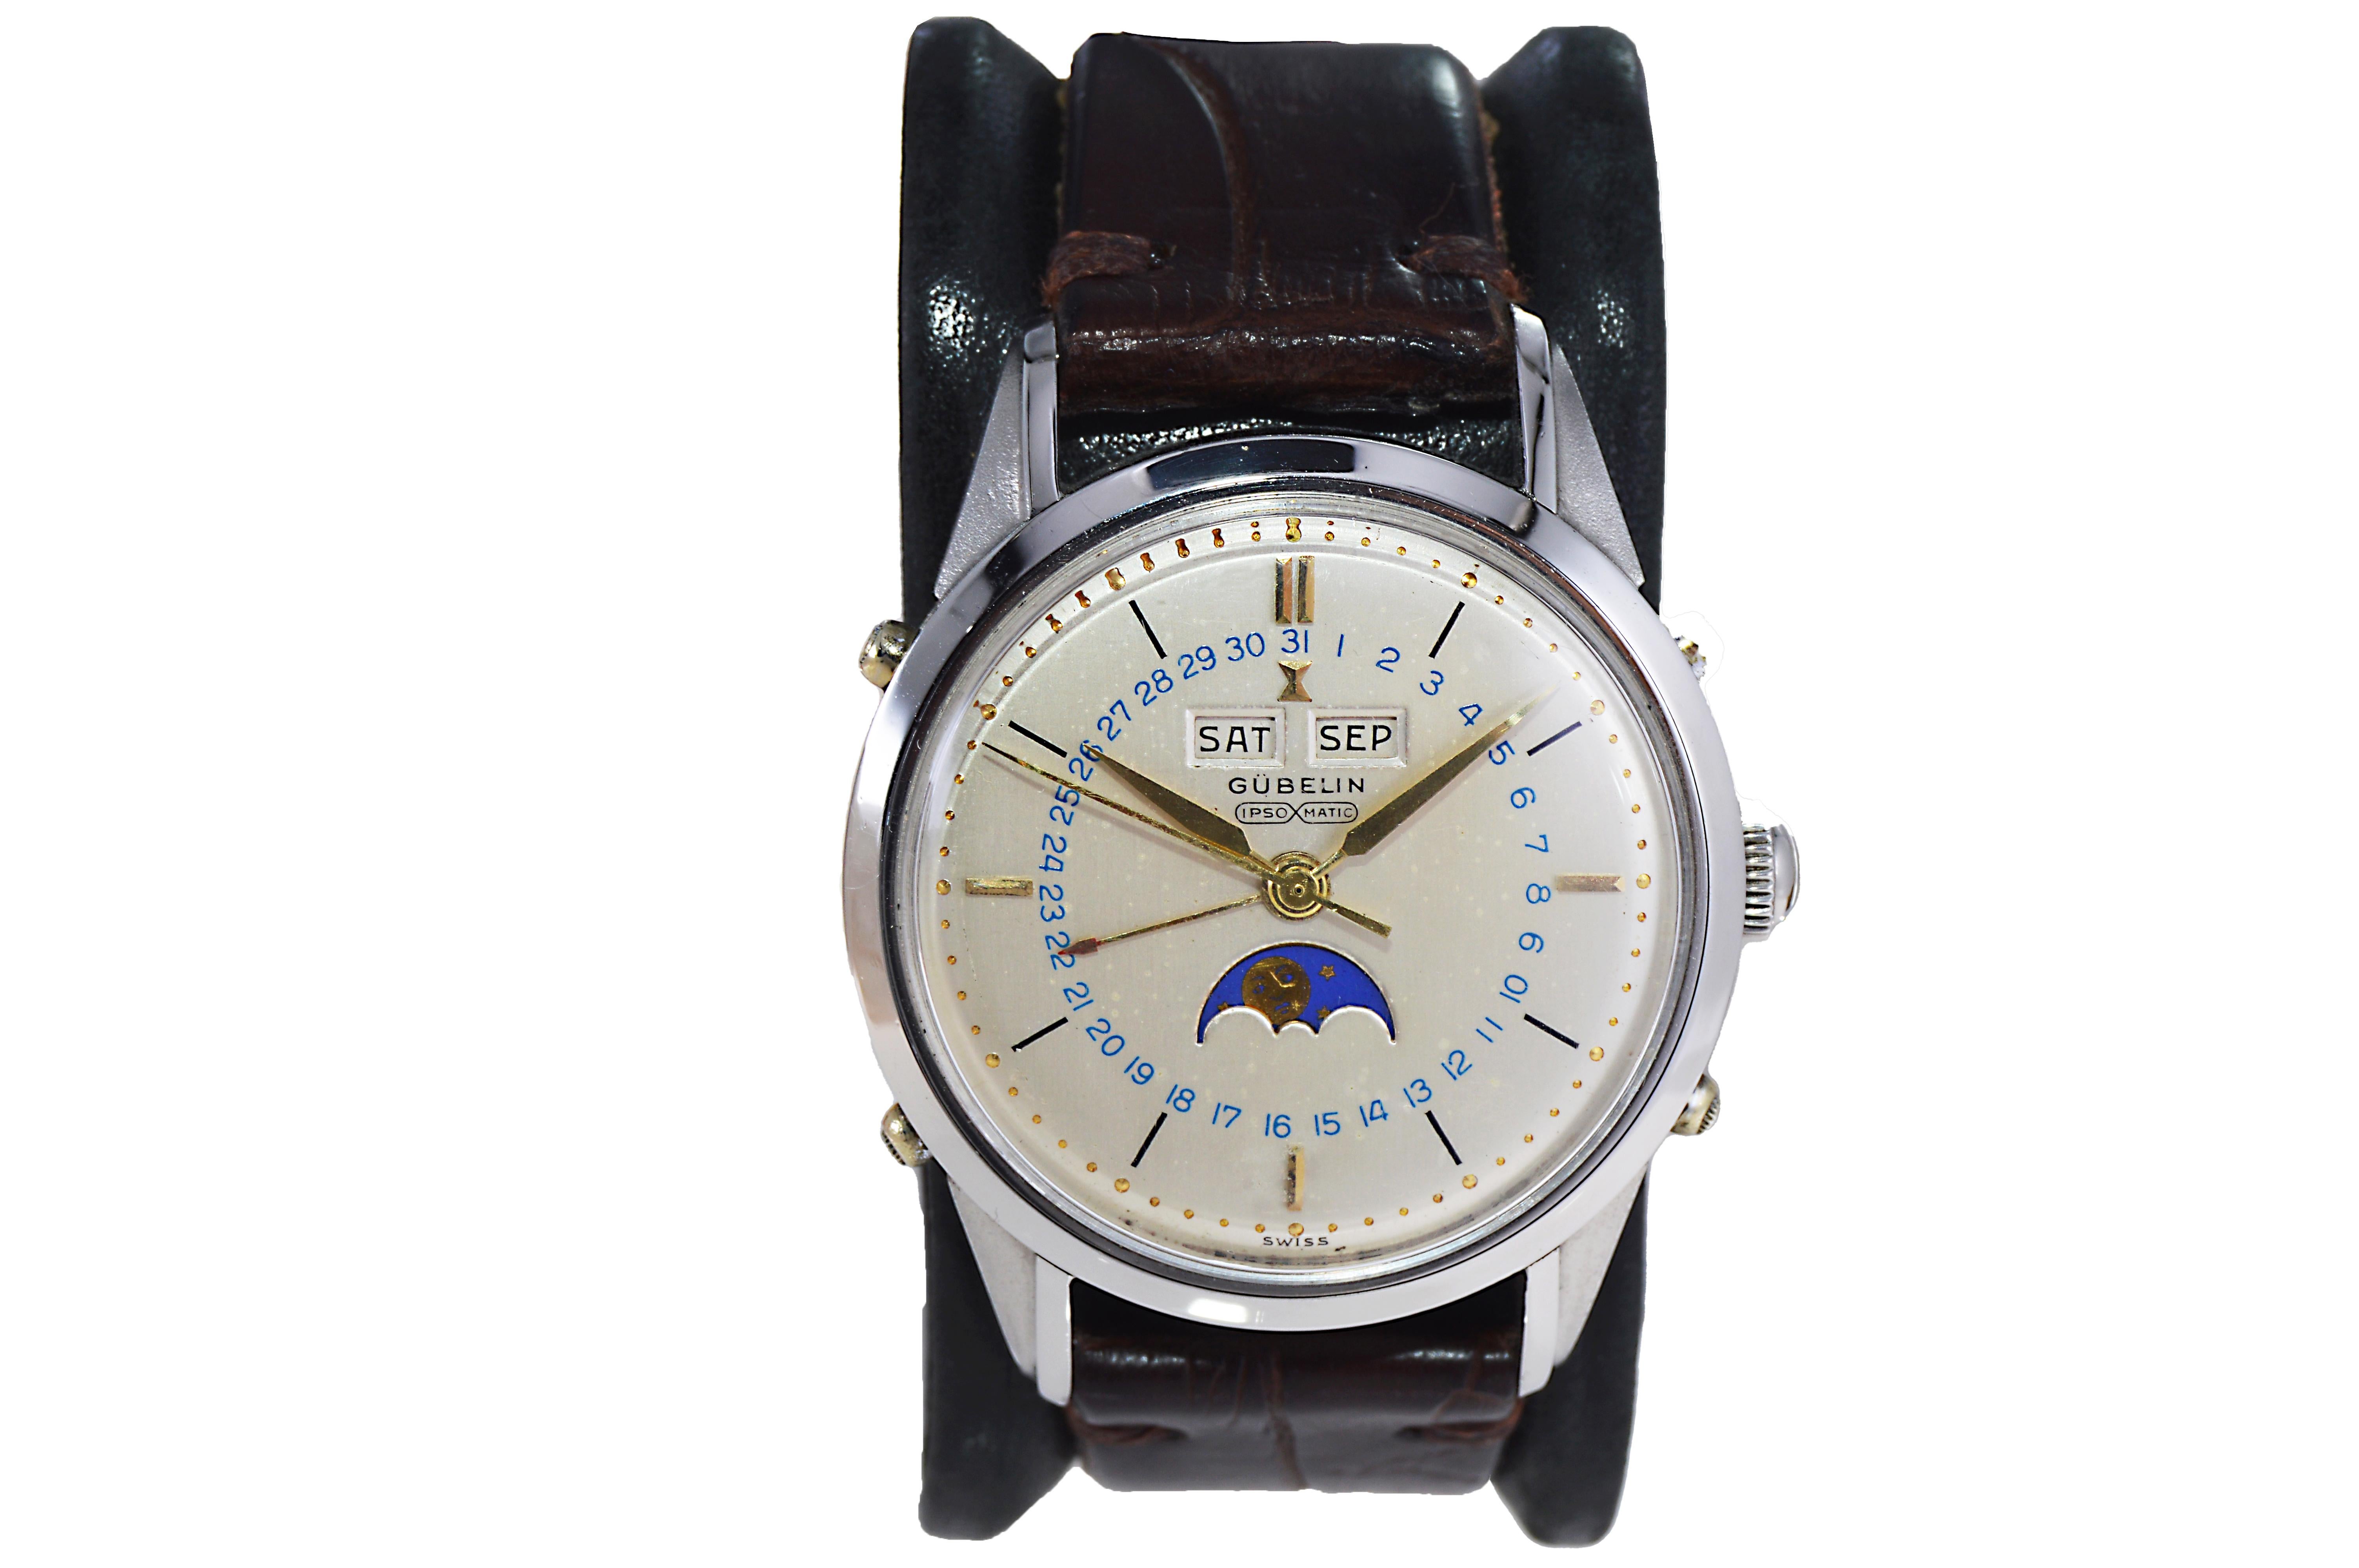 Art Deco Gubelin Stainless Steel Automatic Triple Date Moon Phase Calendar Watch For Sale